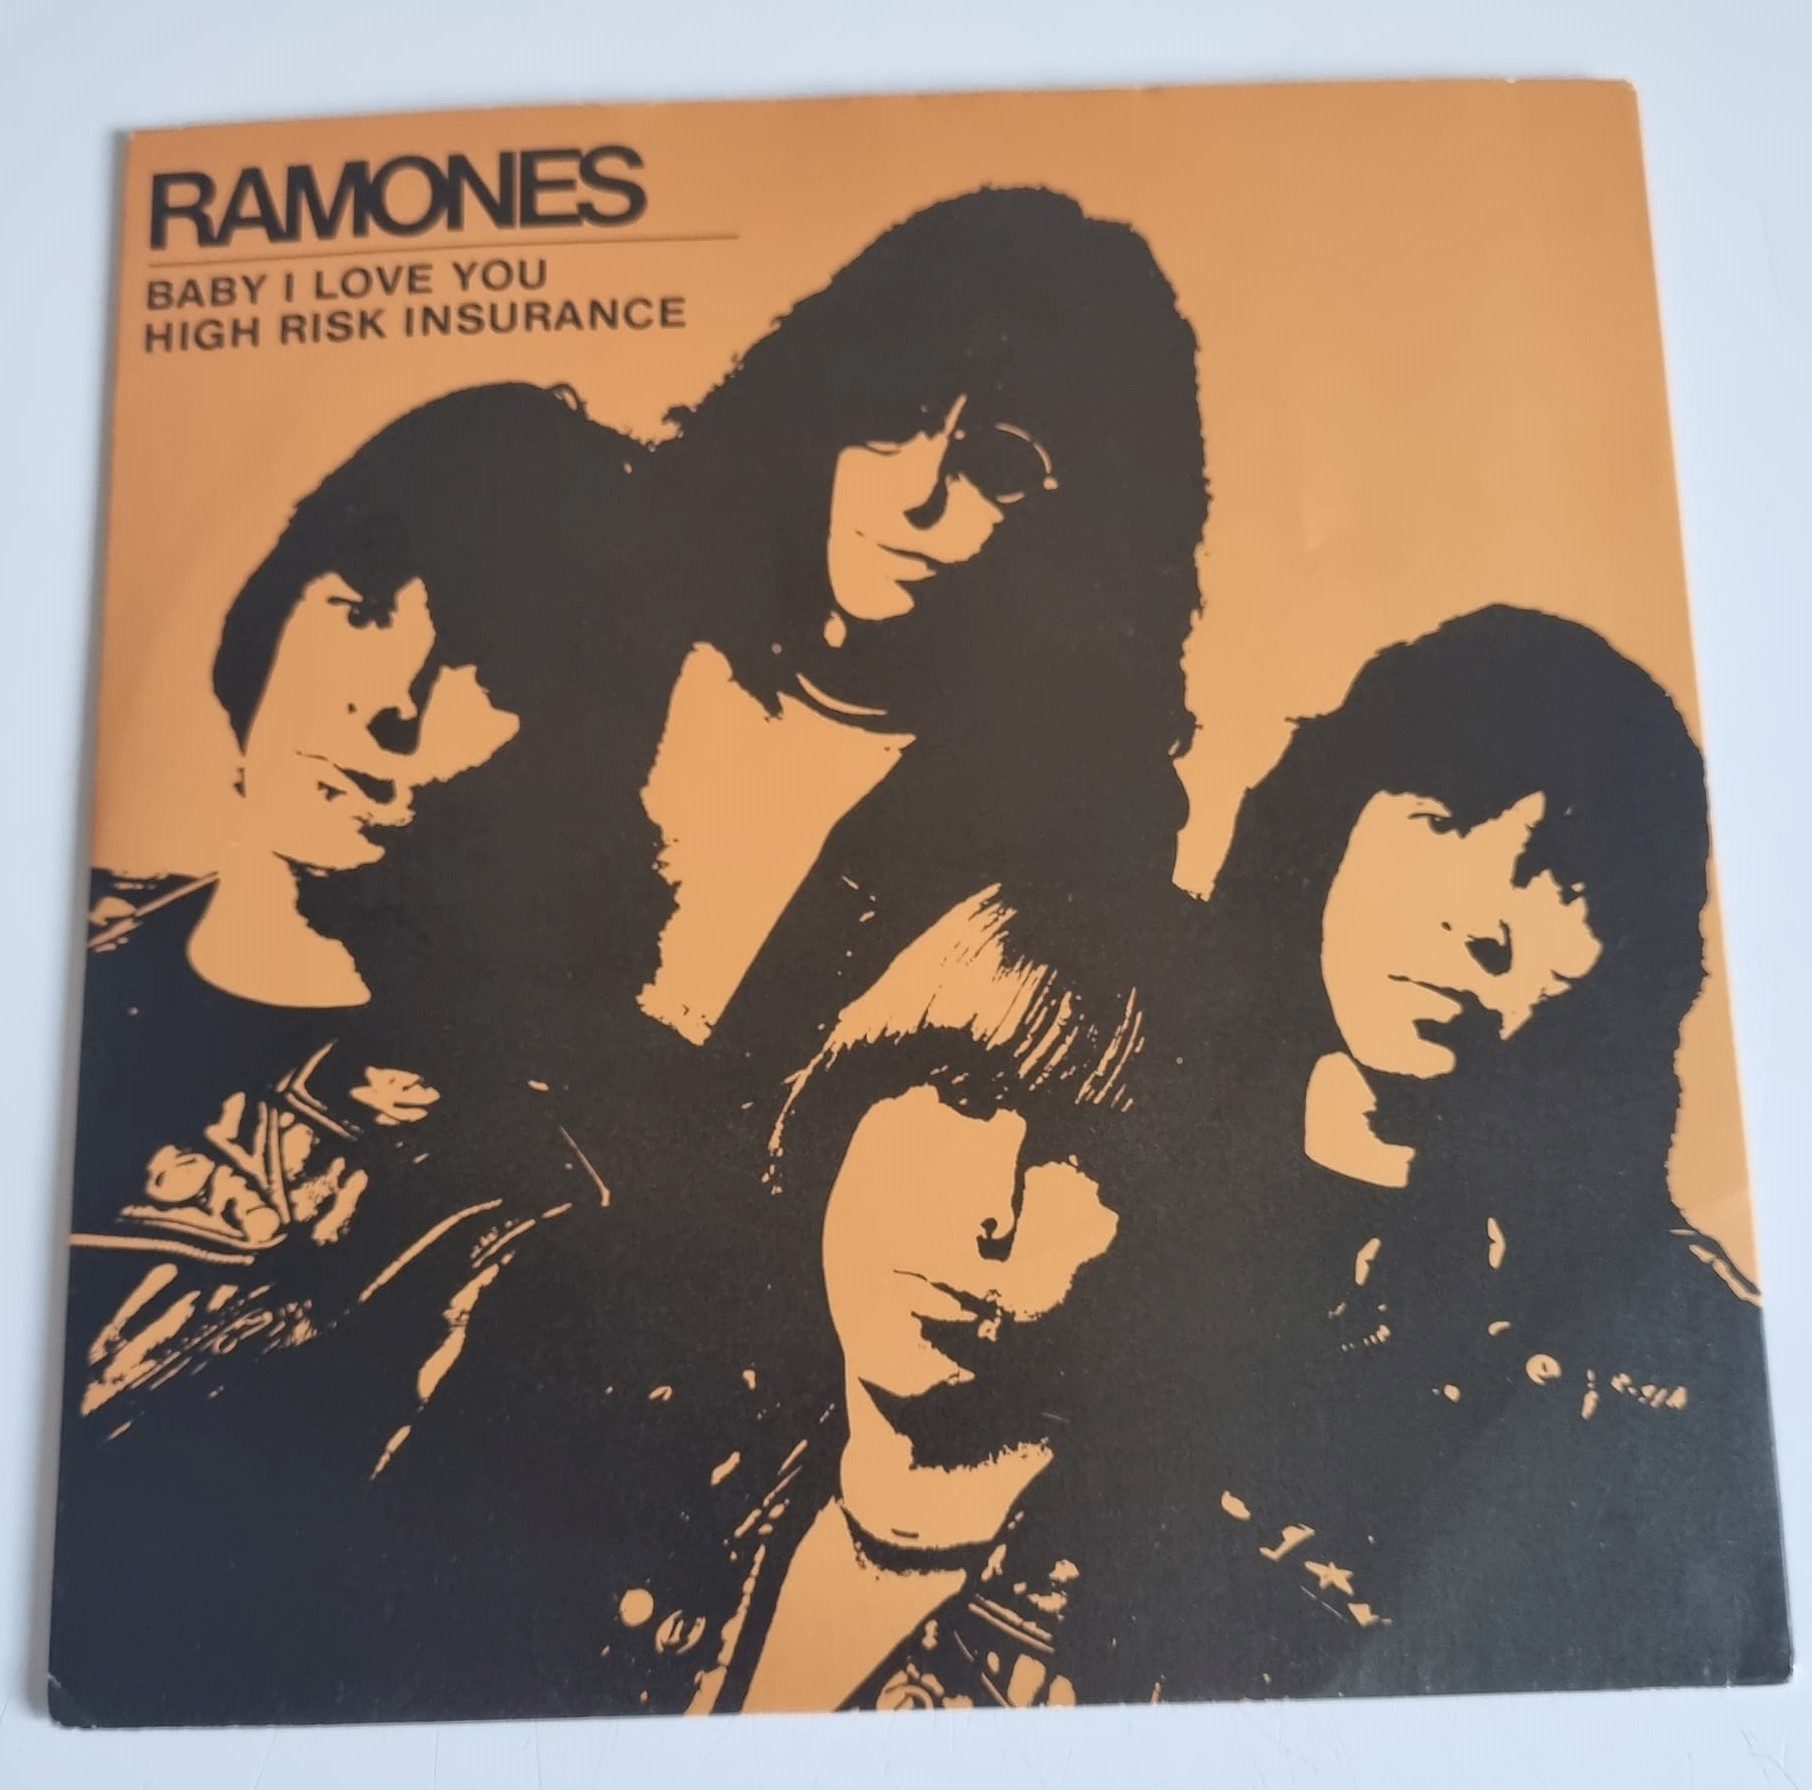 Buy this rare Ramones record by clicking here